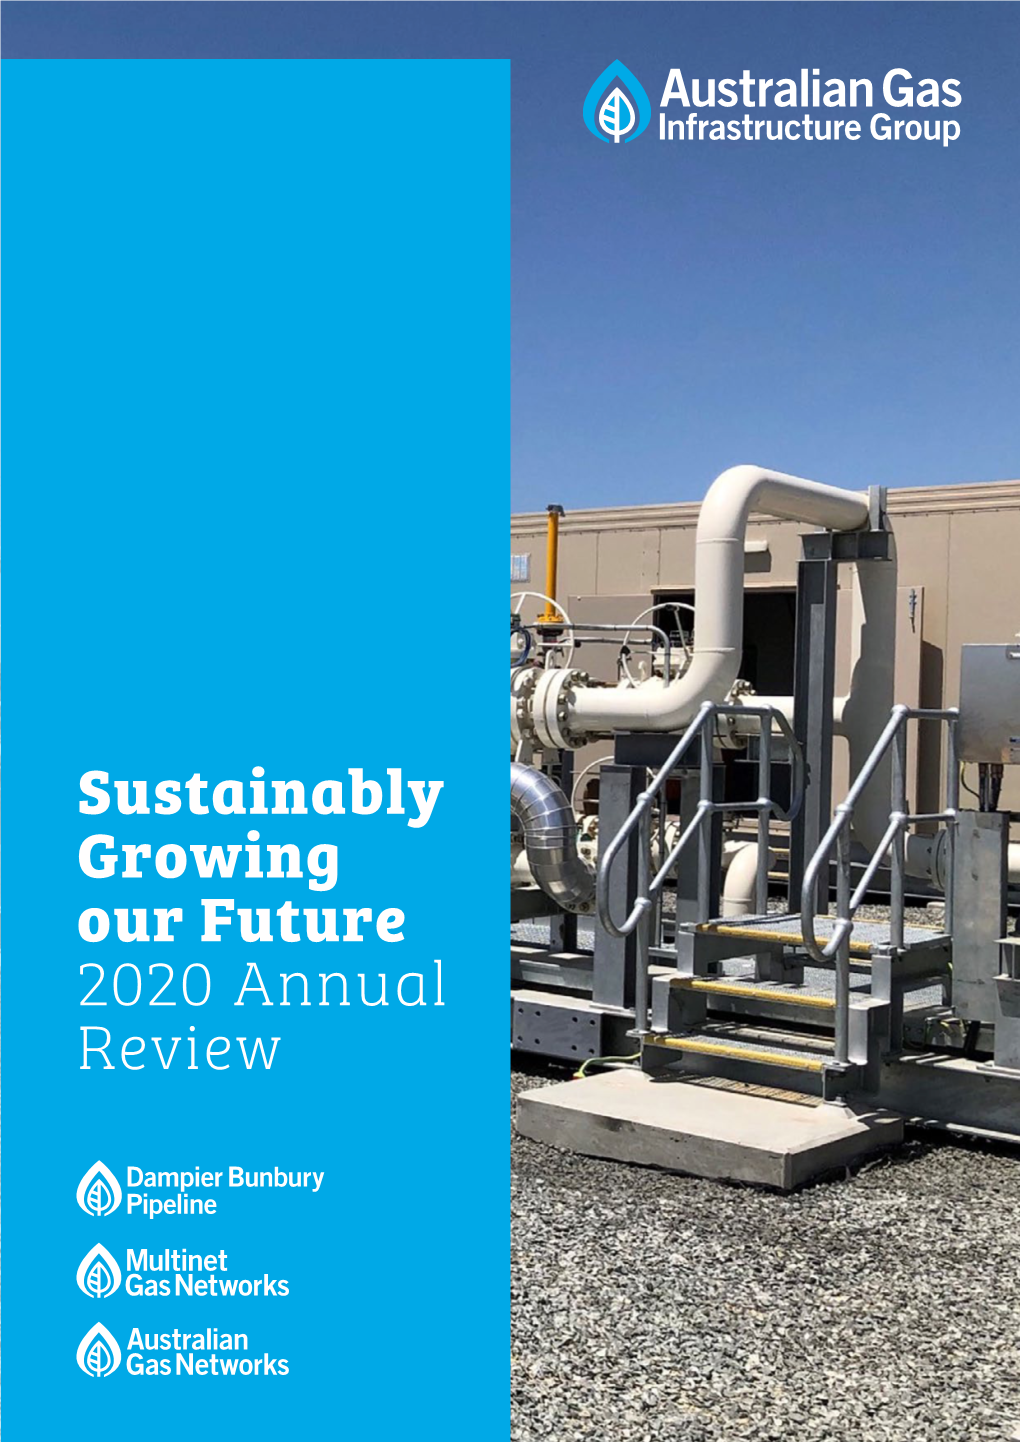 Sustainably Growing Our Future 2020 Annual Review We Are Australian Gas Infrastructure Group (AGIG) One of Australia’S Largest Gas Infrastructure Businesses